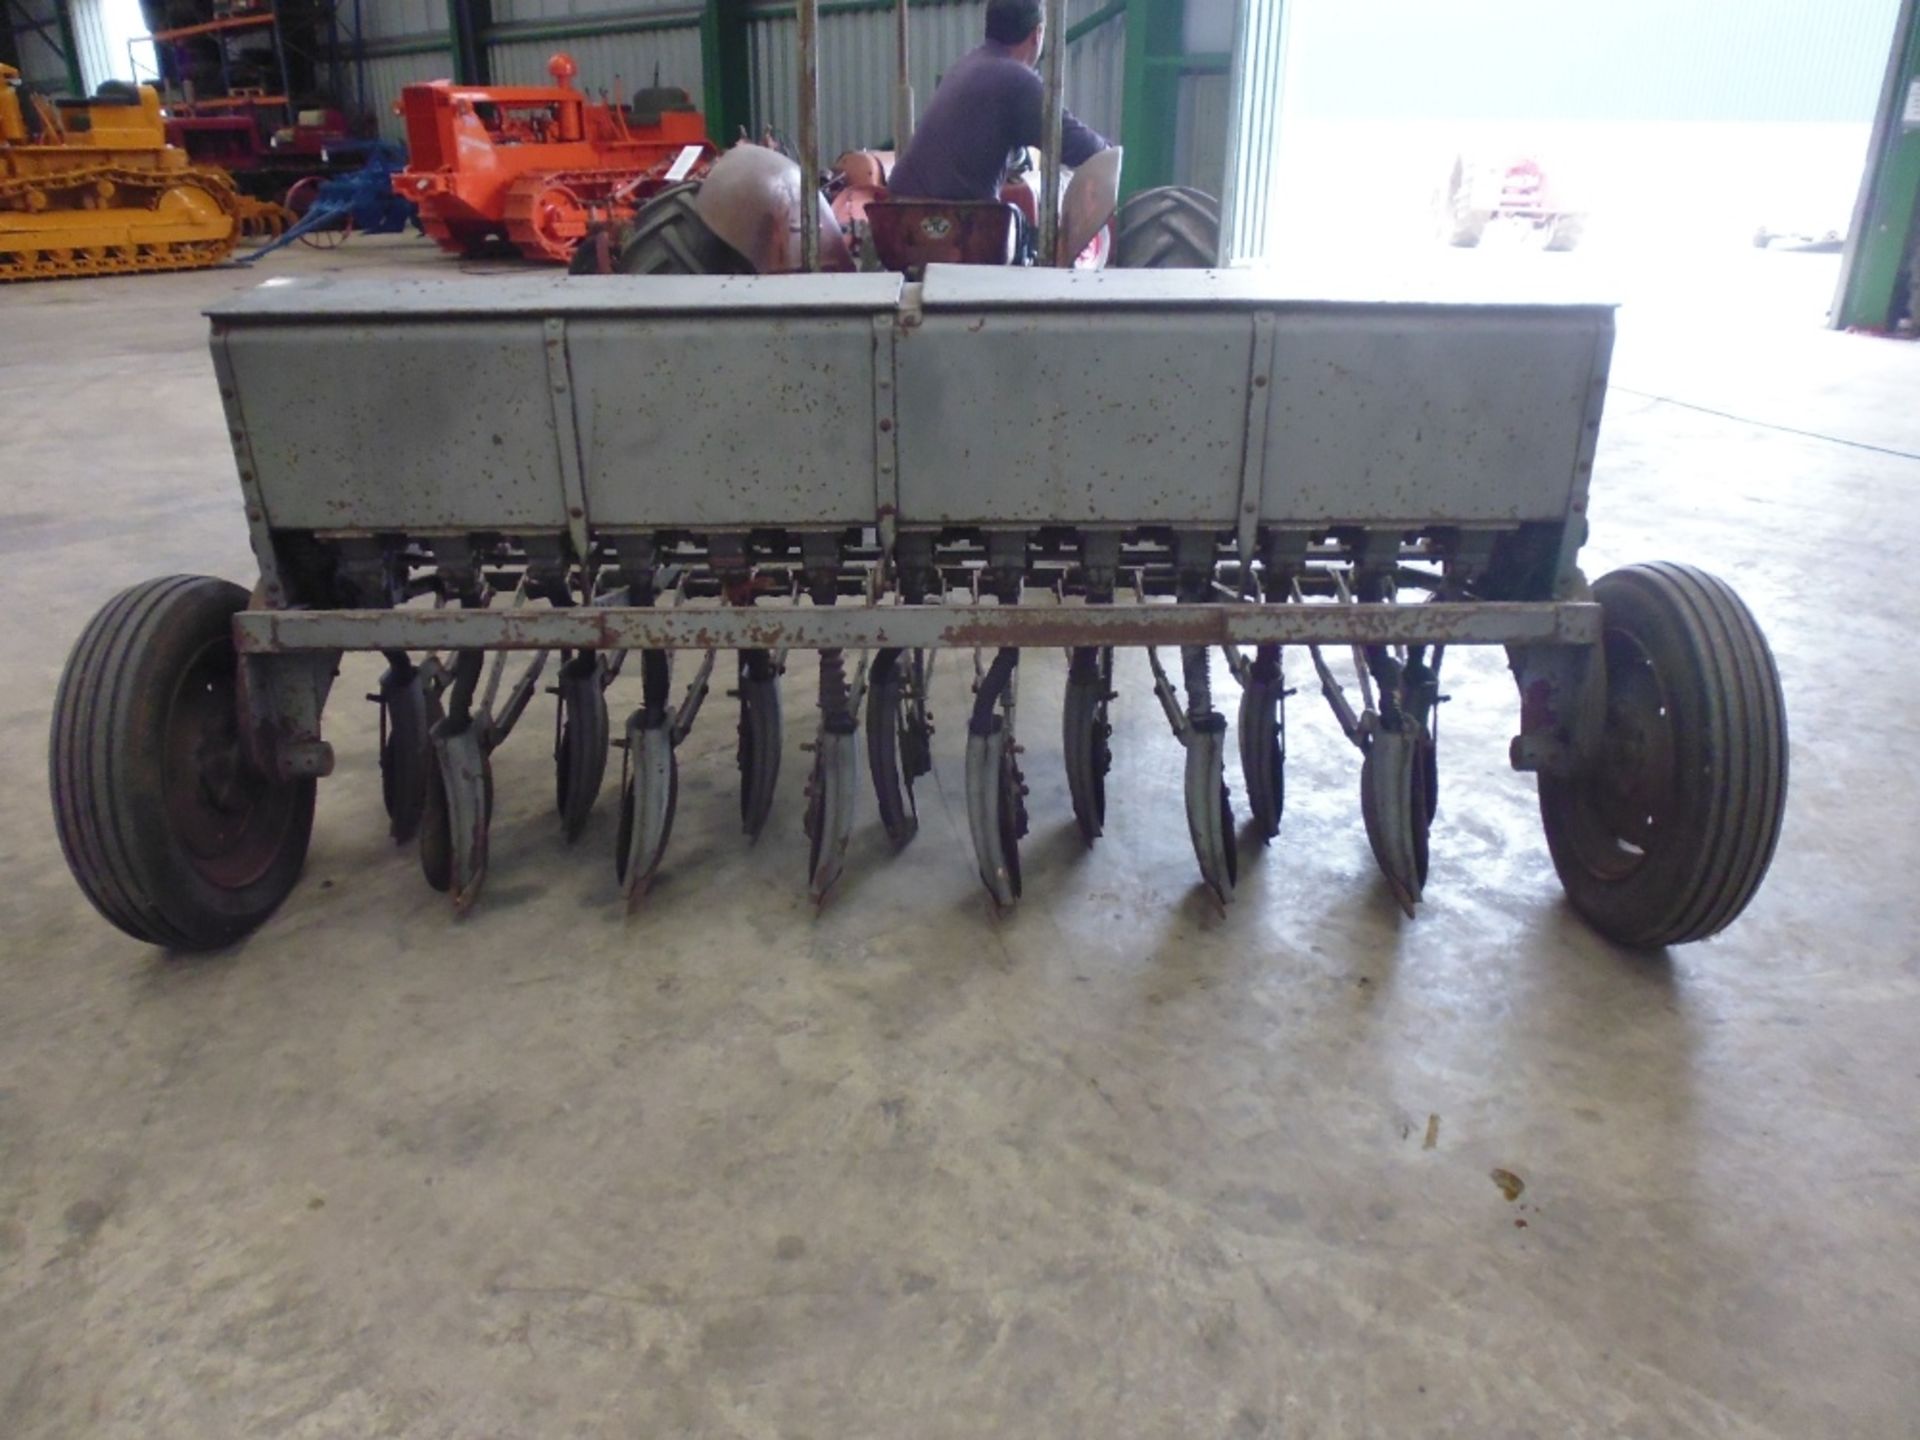 Massey Ferguson 13row trailed coulter seed drill, Model 732 Sn.A9651 - Image 4 of 4